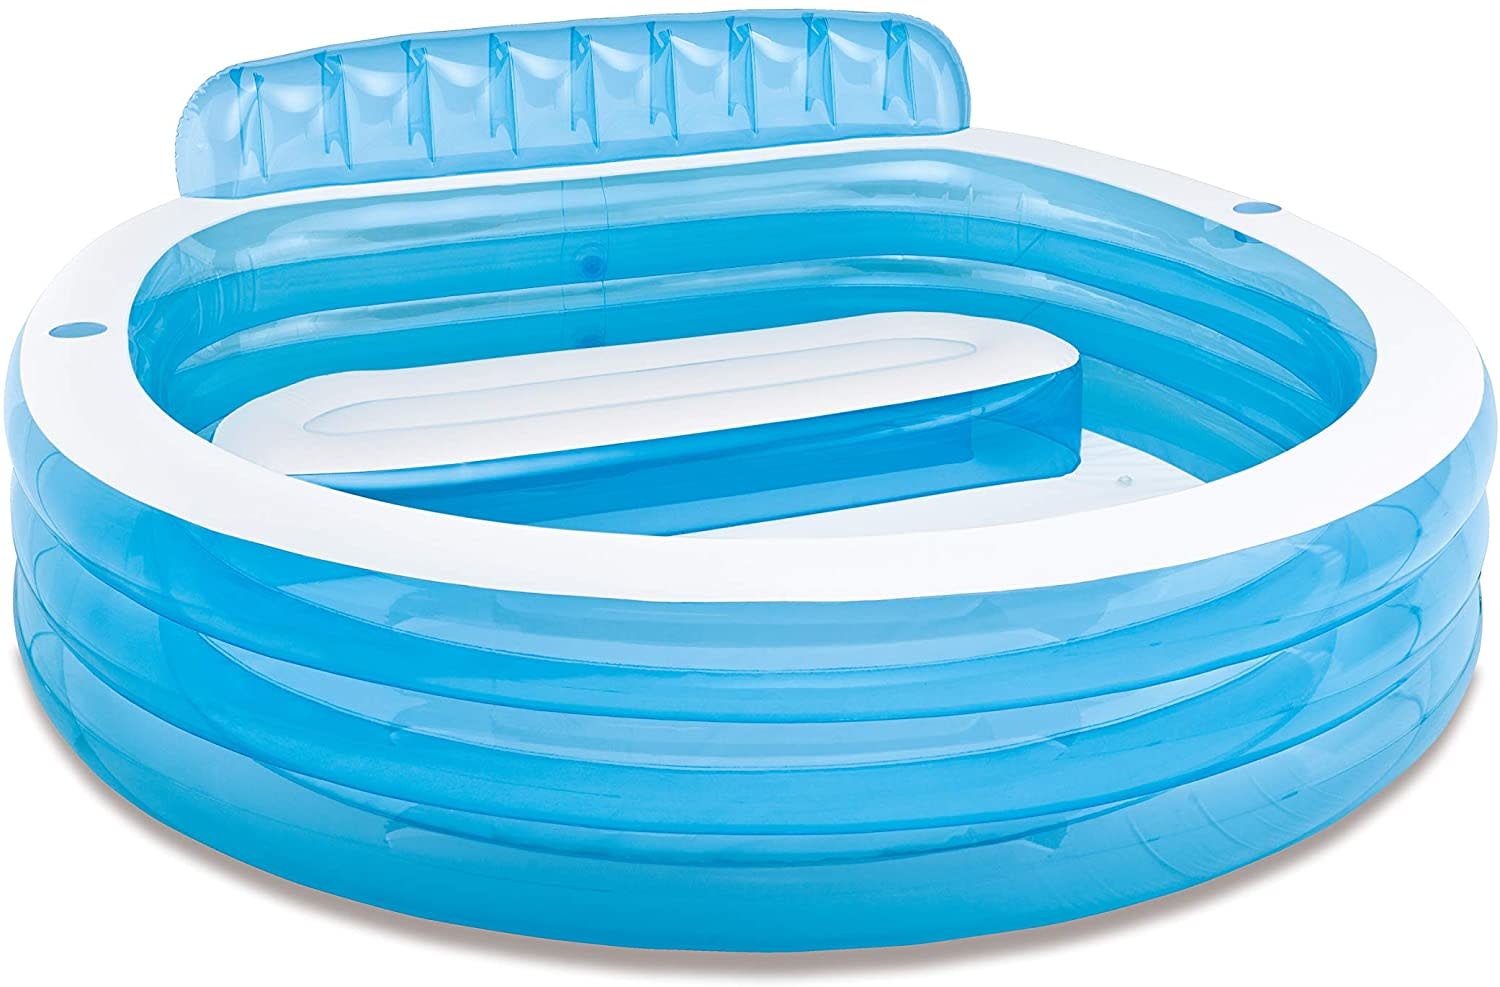 INTEX Intex Swim Center Inflatable Family Lounge Pool, 90" X 86" X 31", for Ages 3+